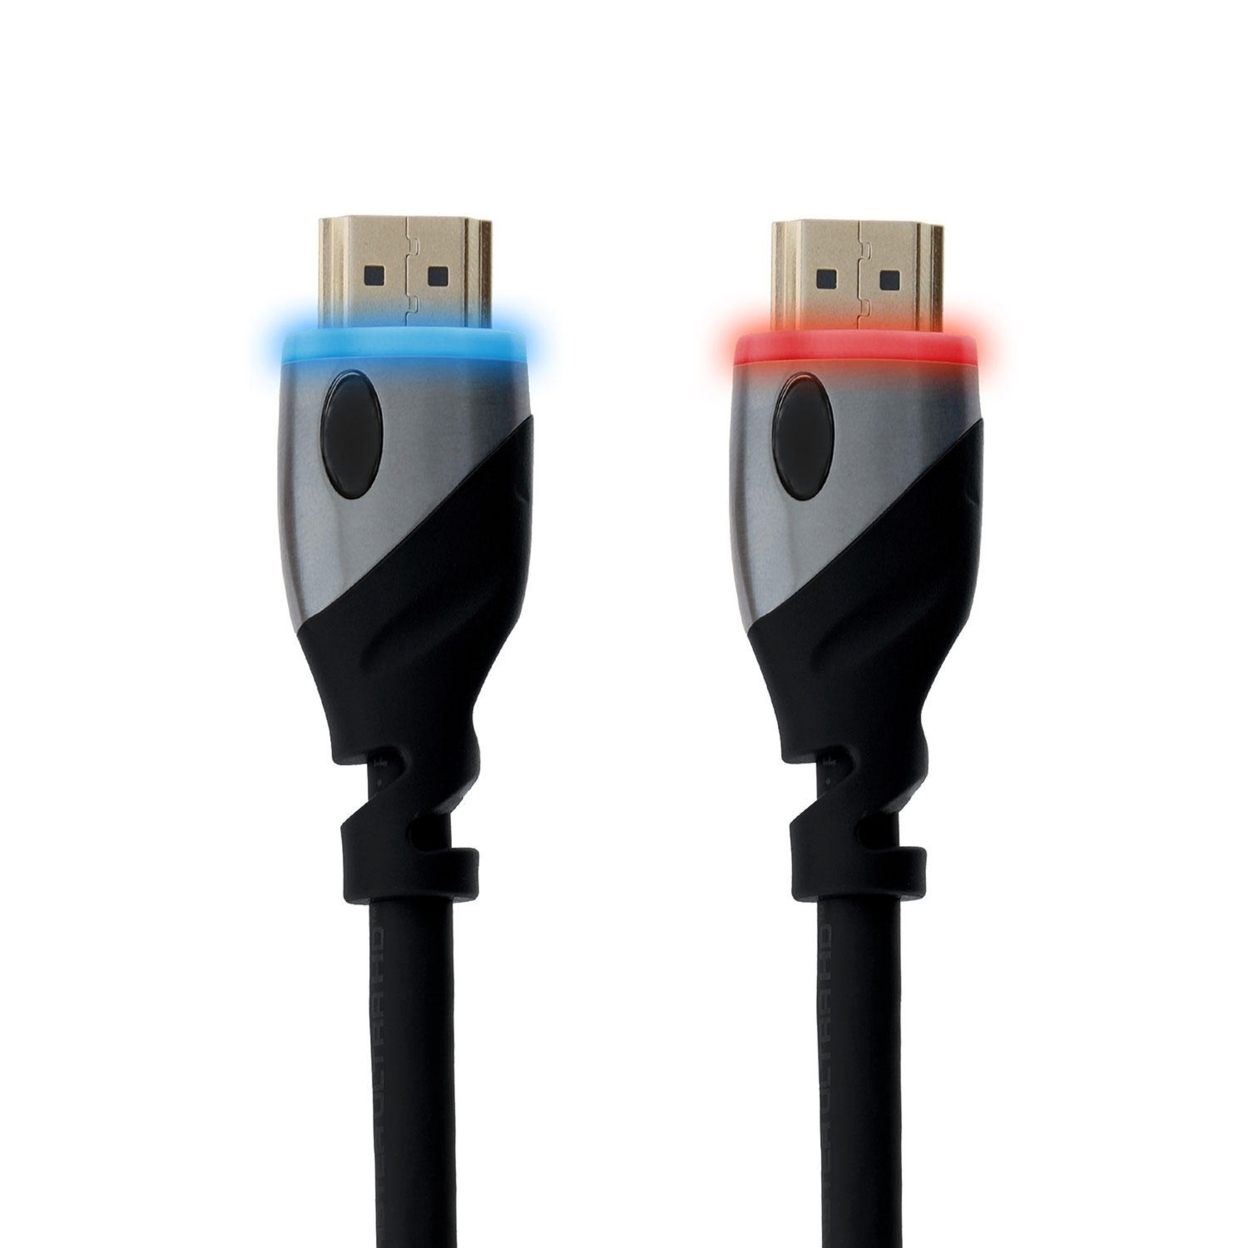 Member's Mark 9' LED Lighted HDMI Premium Cables